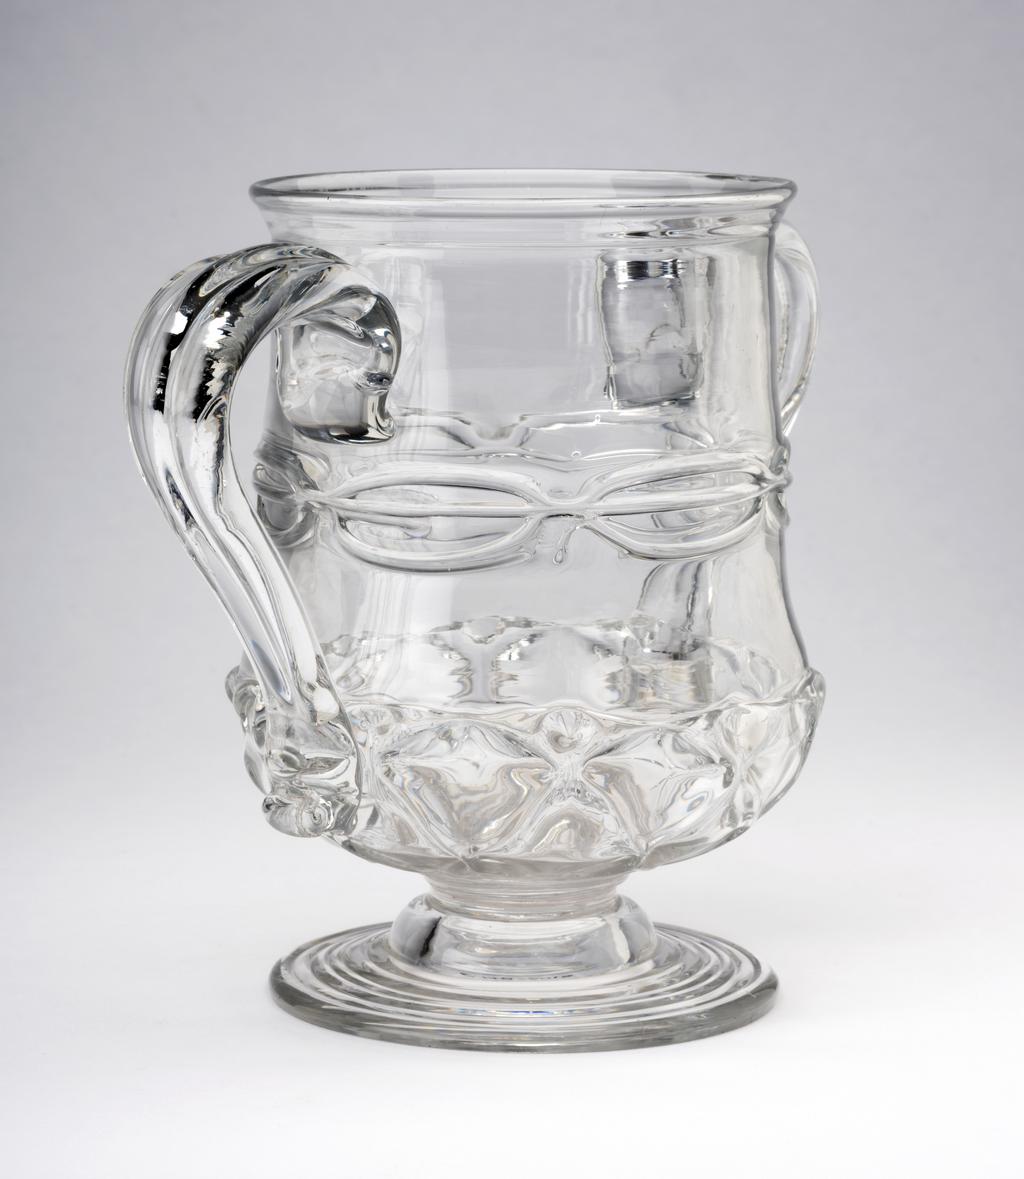 An image of Two-handled cup. Unidentified English glasshouse. The cup stands on a circular foot with a rough pontil mark underneath. The body is thistle-shaped with two applied loop handles.  The foot has indented rings. The lower part of the body is moulded with ribs, pincered into a repeating diamond pattern (nipt diamond-waies). The waist has three horizontally trailed threads pincered twice on each side and once under each handle to form a chain. The handles have a vertical ridge and a pincered kick at the bottom. Colourless lead-glass blown, pattern-moulded, pincered, and trailed. height, whole, 14.8 cm, width, whole, 20 cm, 1690-1710. Baroque. Sir Ivor and Lady Batchelor Bequest through The Art Fund.